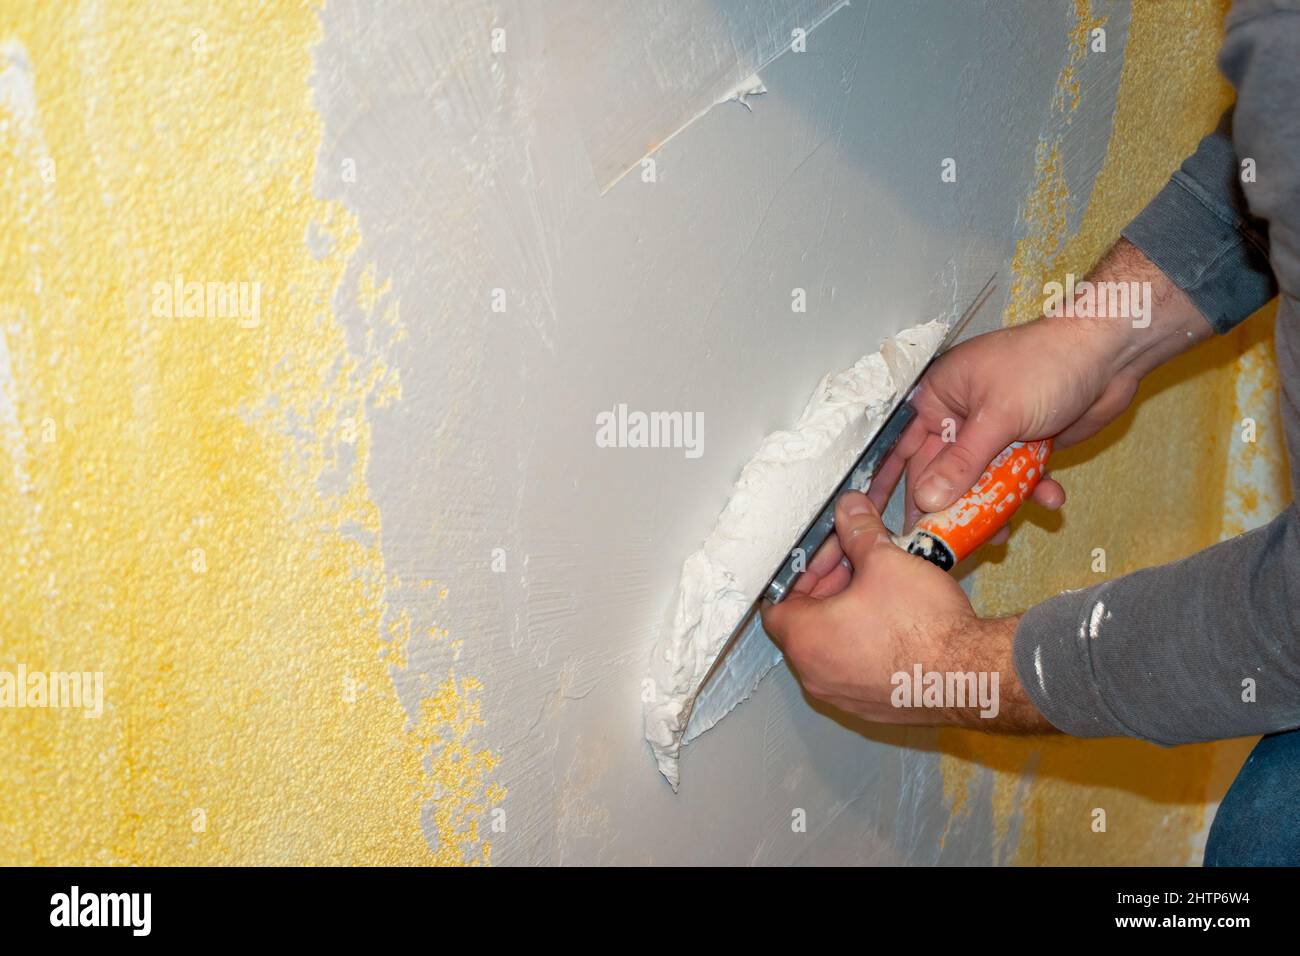 Plastering a wall with plaster in a house with a plaster knife and putty knife and heavy manual work Stock Photo